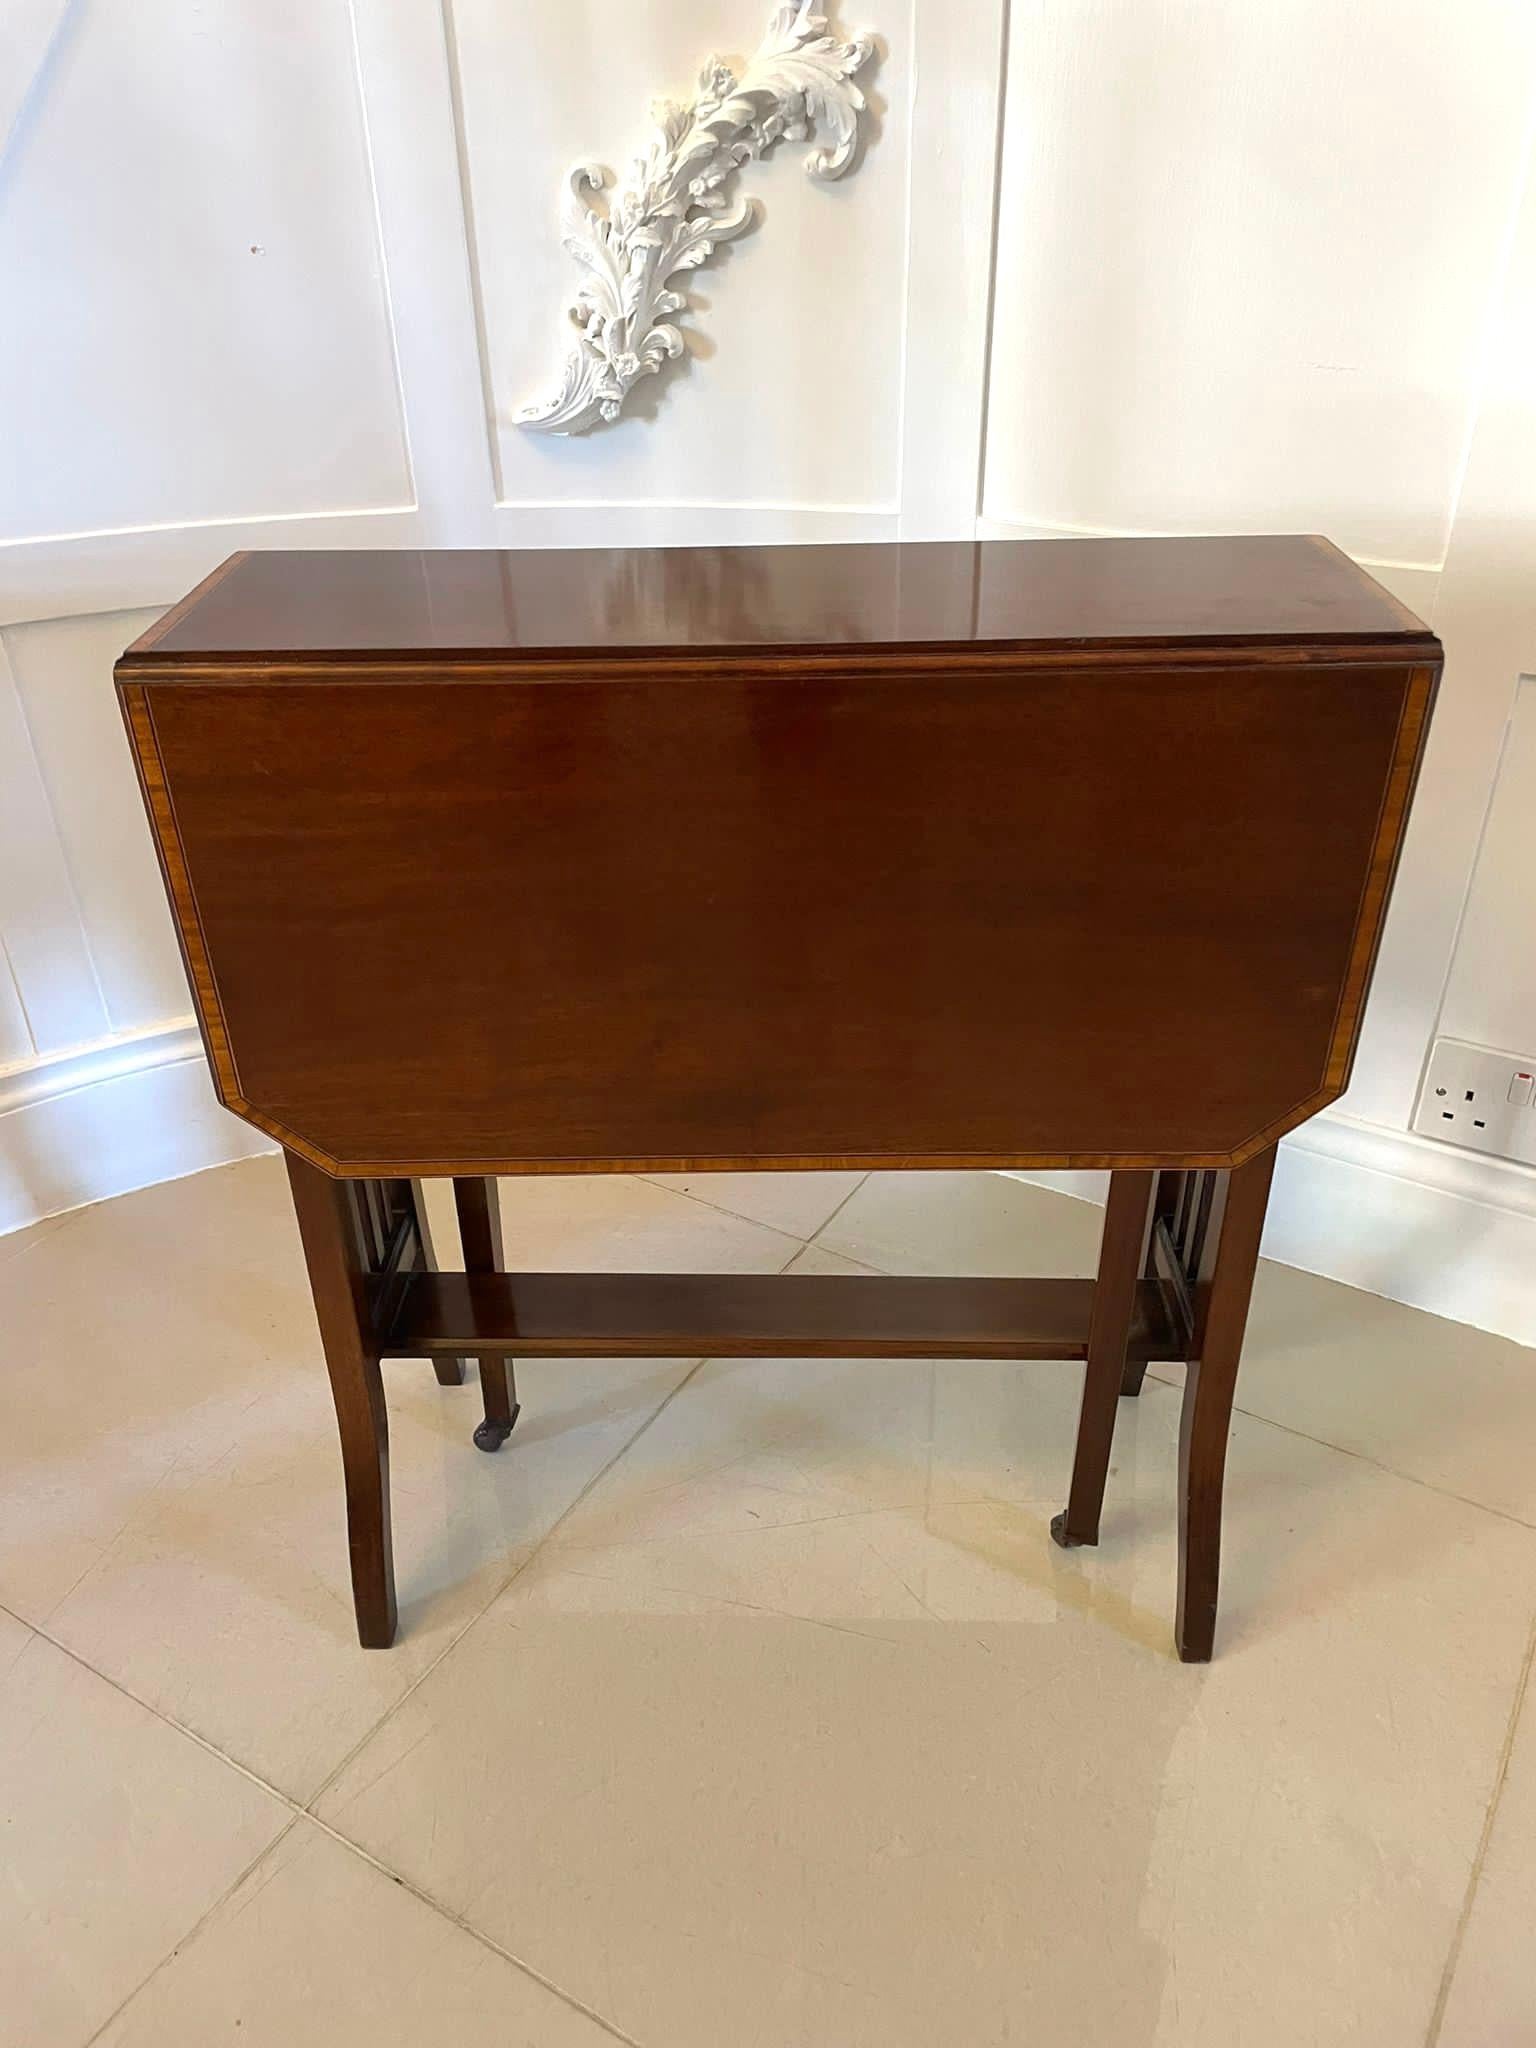 Other Antique Edwardian Quality Inlaid Mahogany Sutherland Table For Sale